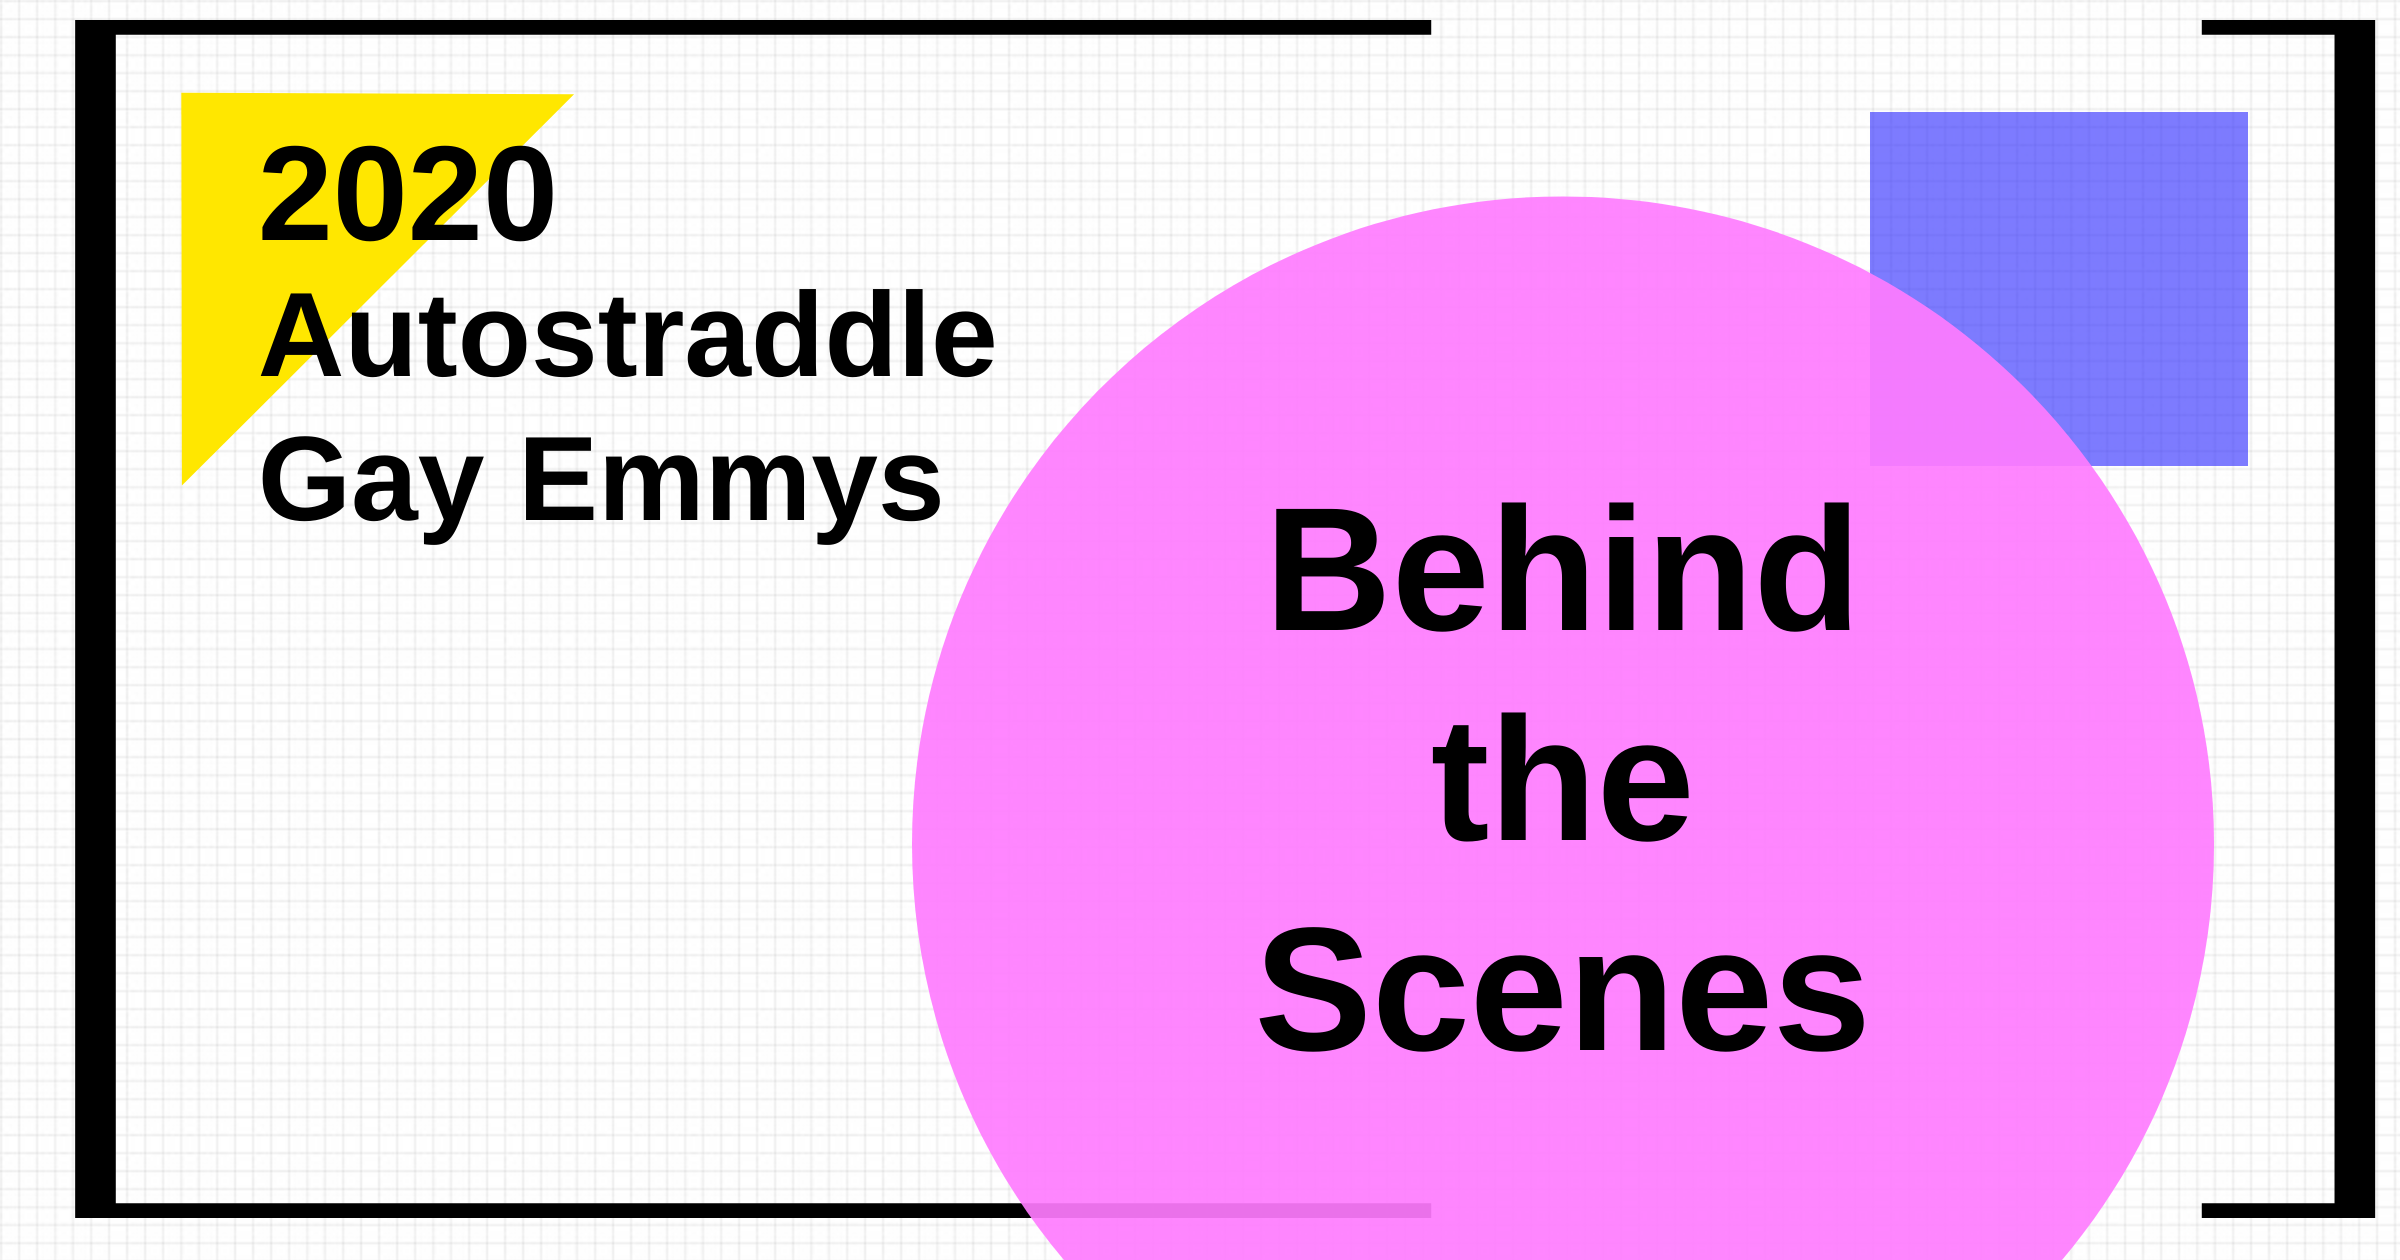 Feature image reads "2020 Autostraddle Gay Emmys: Behind the Scenes"